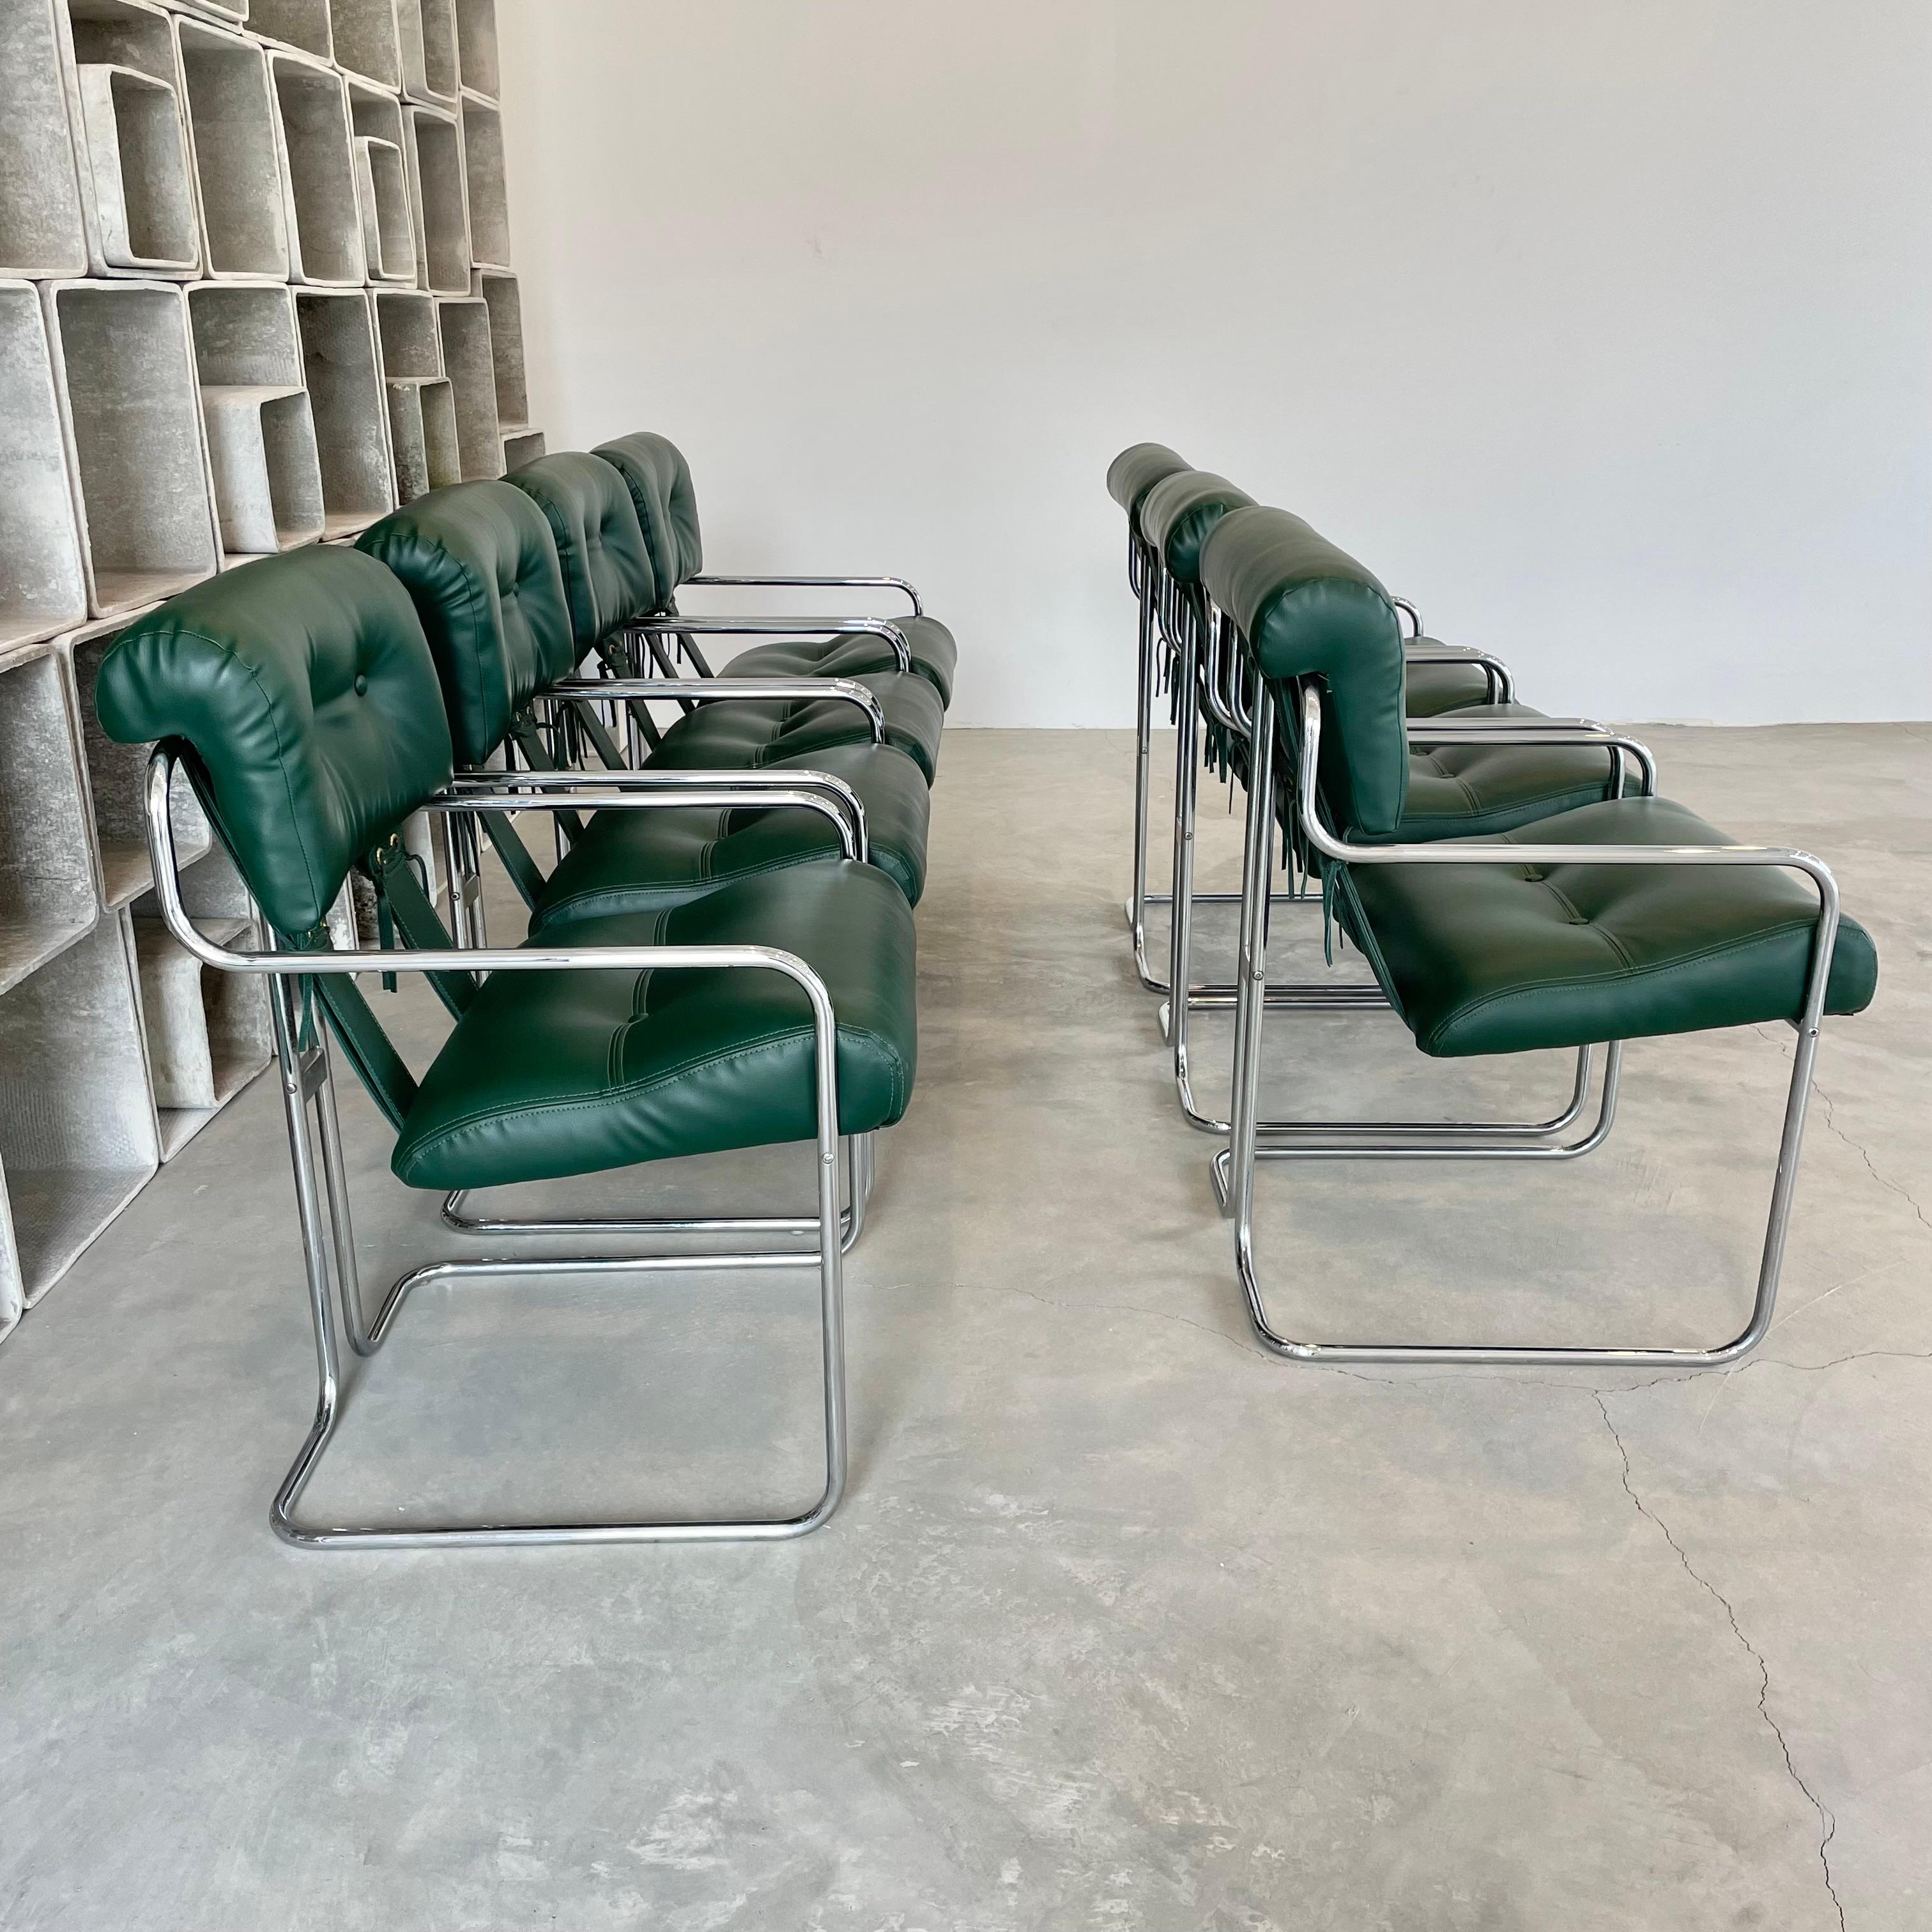 Mid-Century Modern Set of 7 'Tucroma' Chairs in Green by Guido Faleschini, 1970s Italy